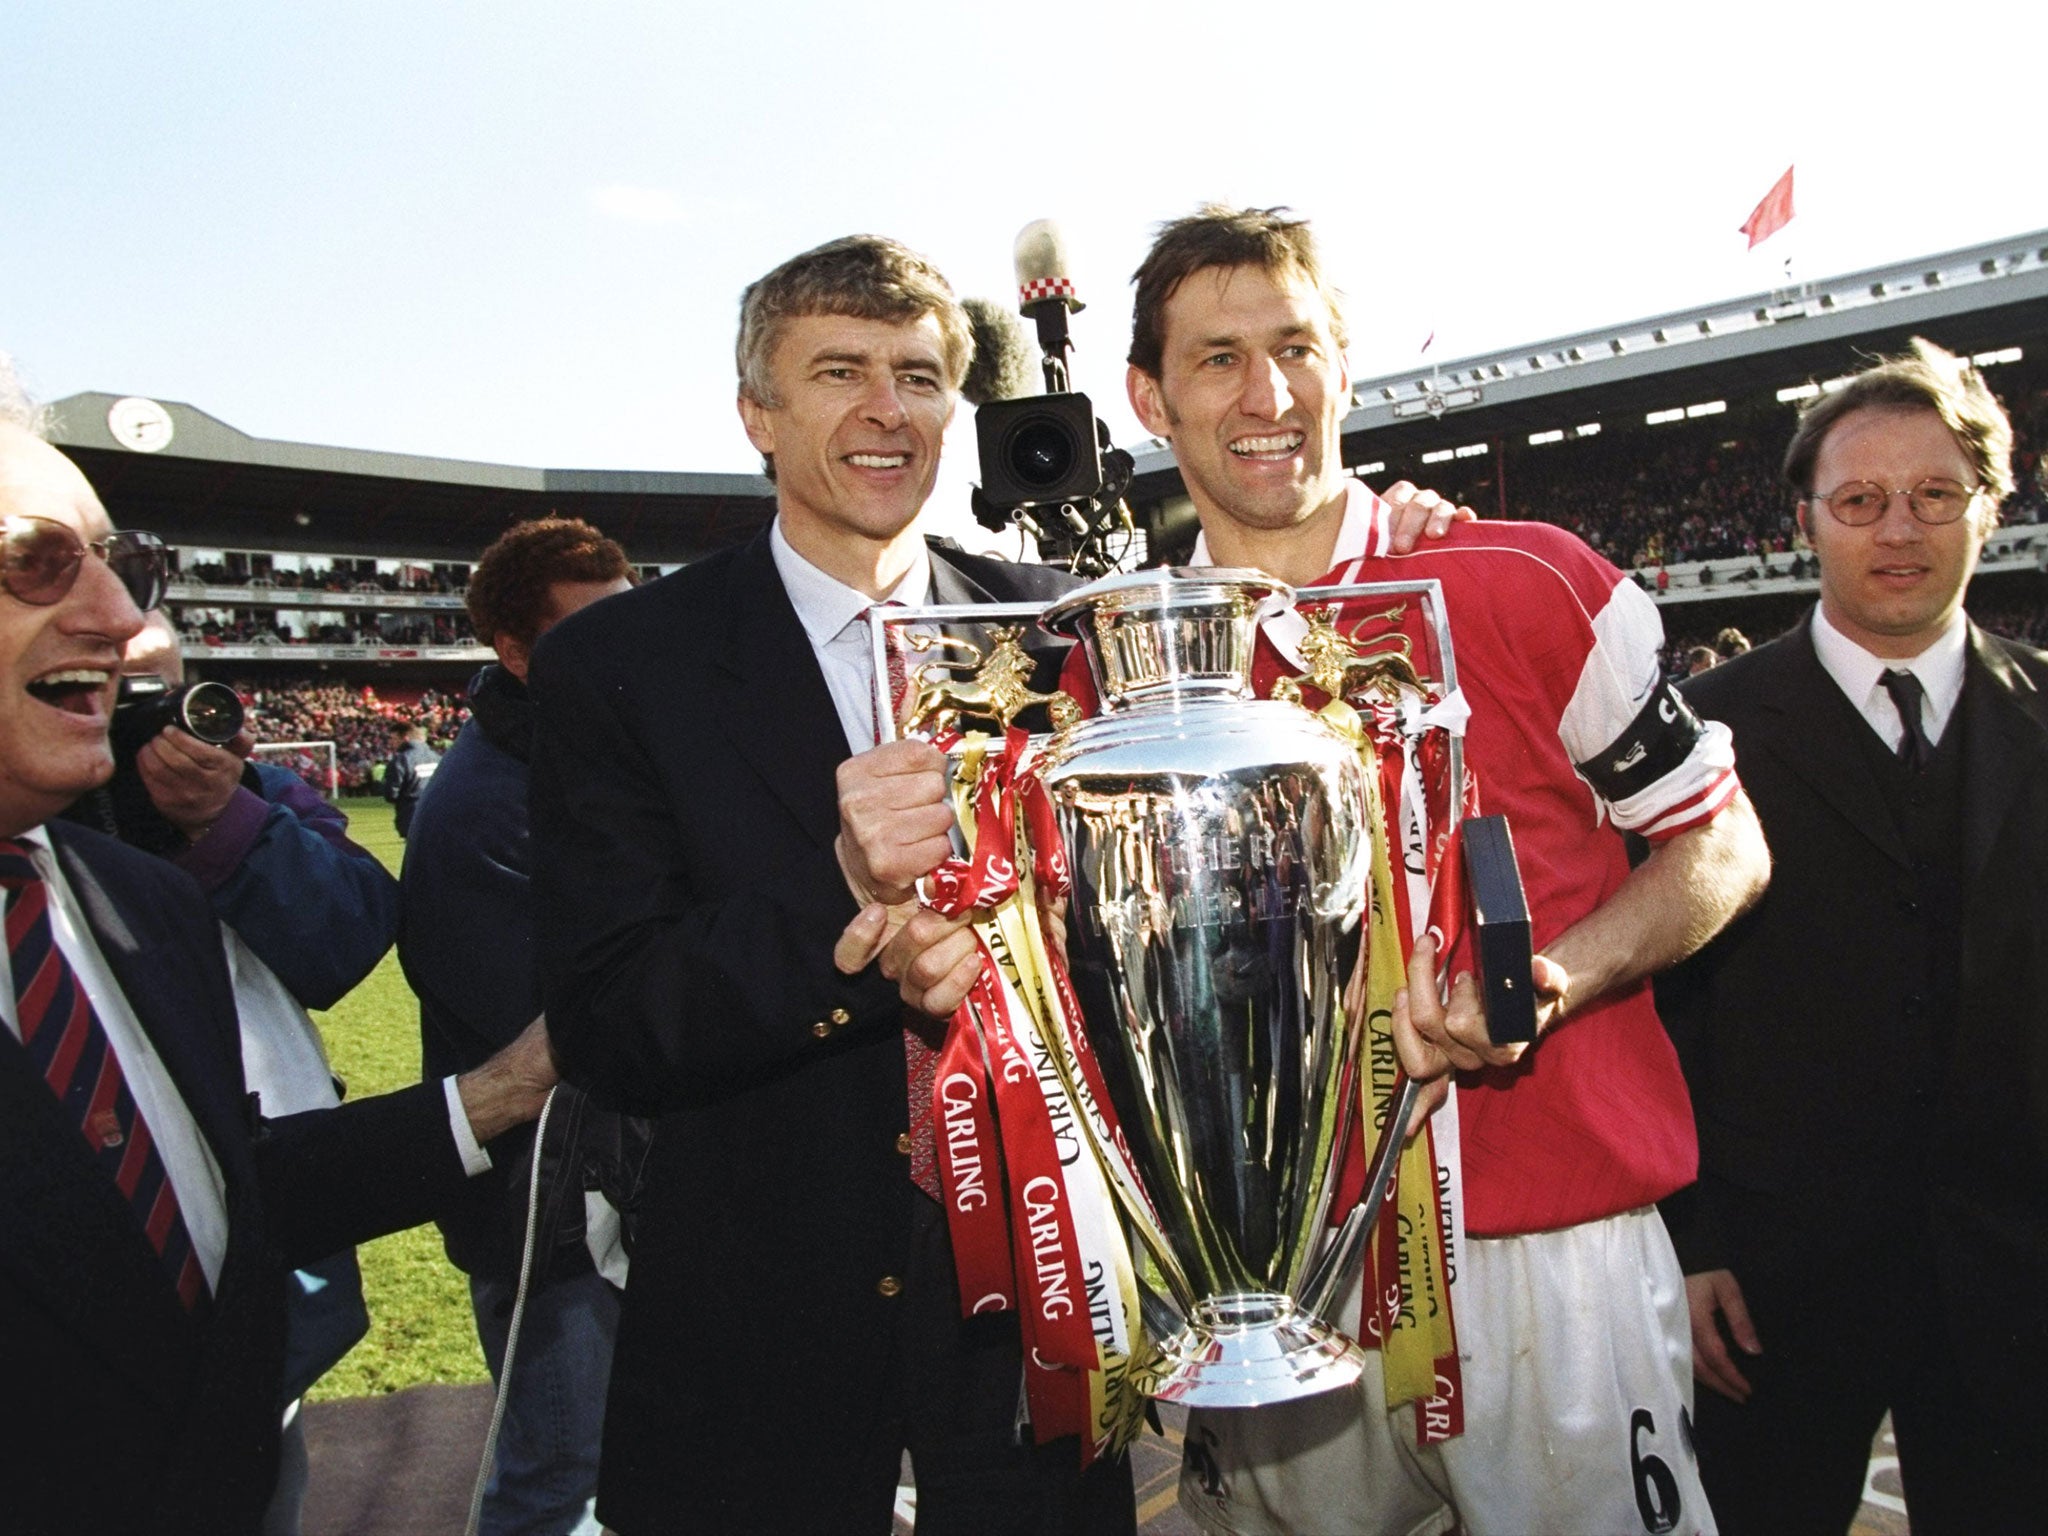 The glory days: Wenger and club captain Tony Adams hold the championship trophy after the FA Carling Premiership match against Everton at Highbury. Arsenal won 4-0 to secure the title.